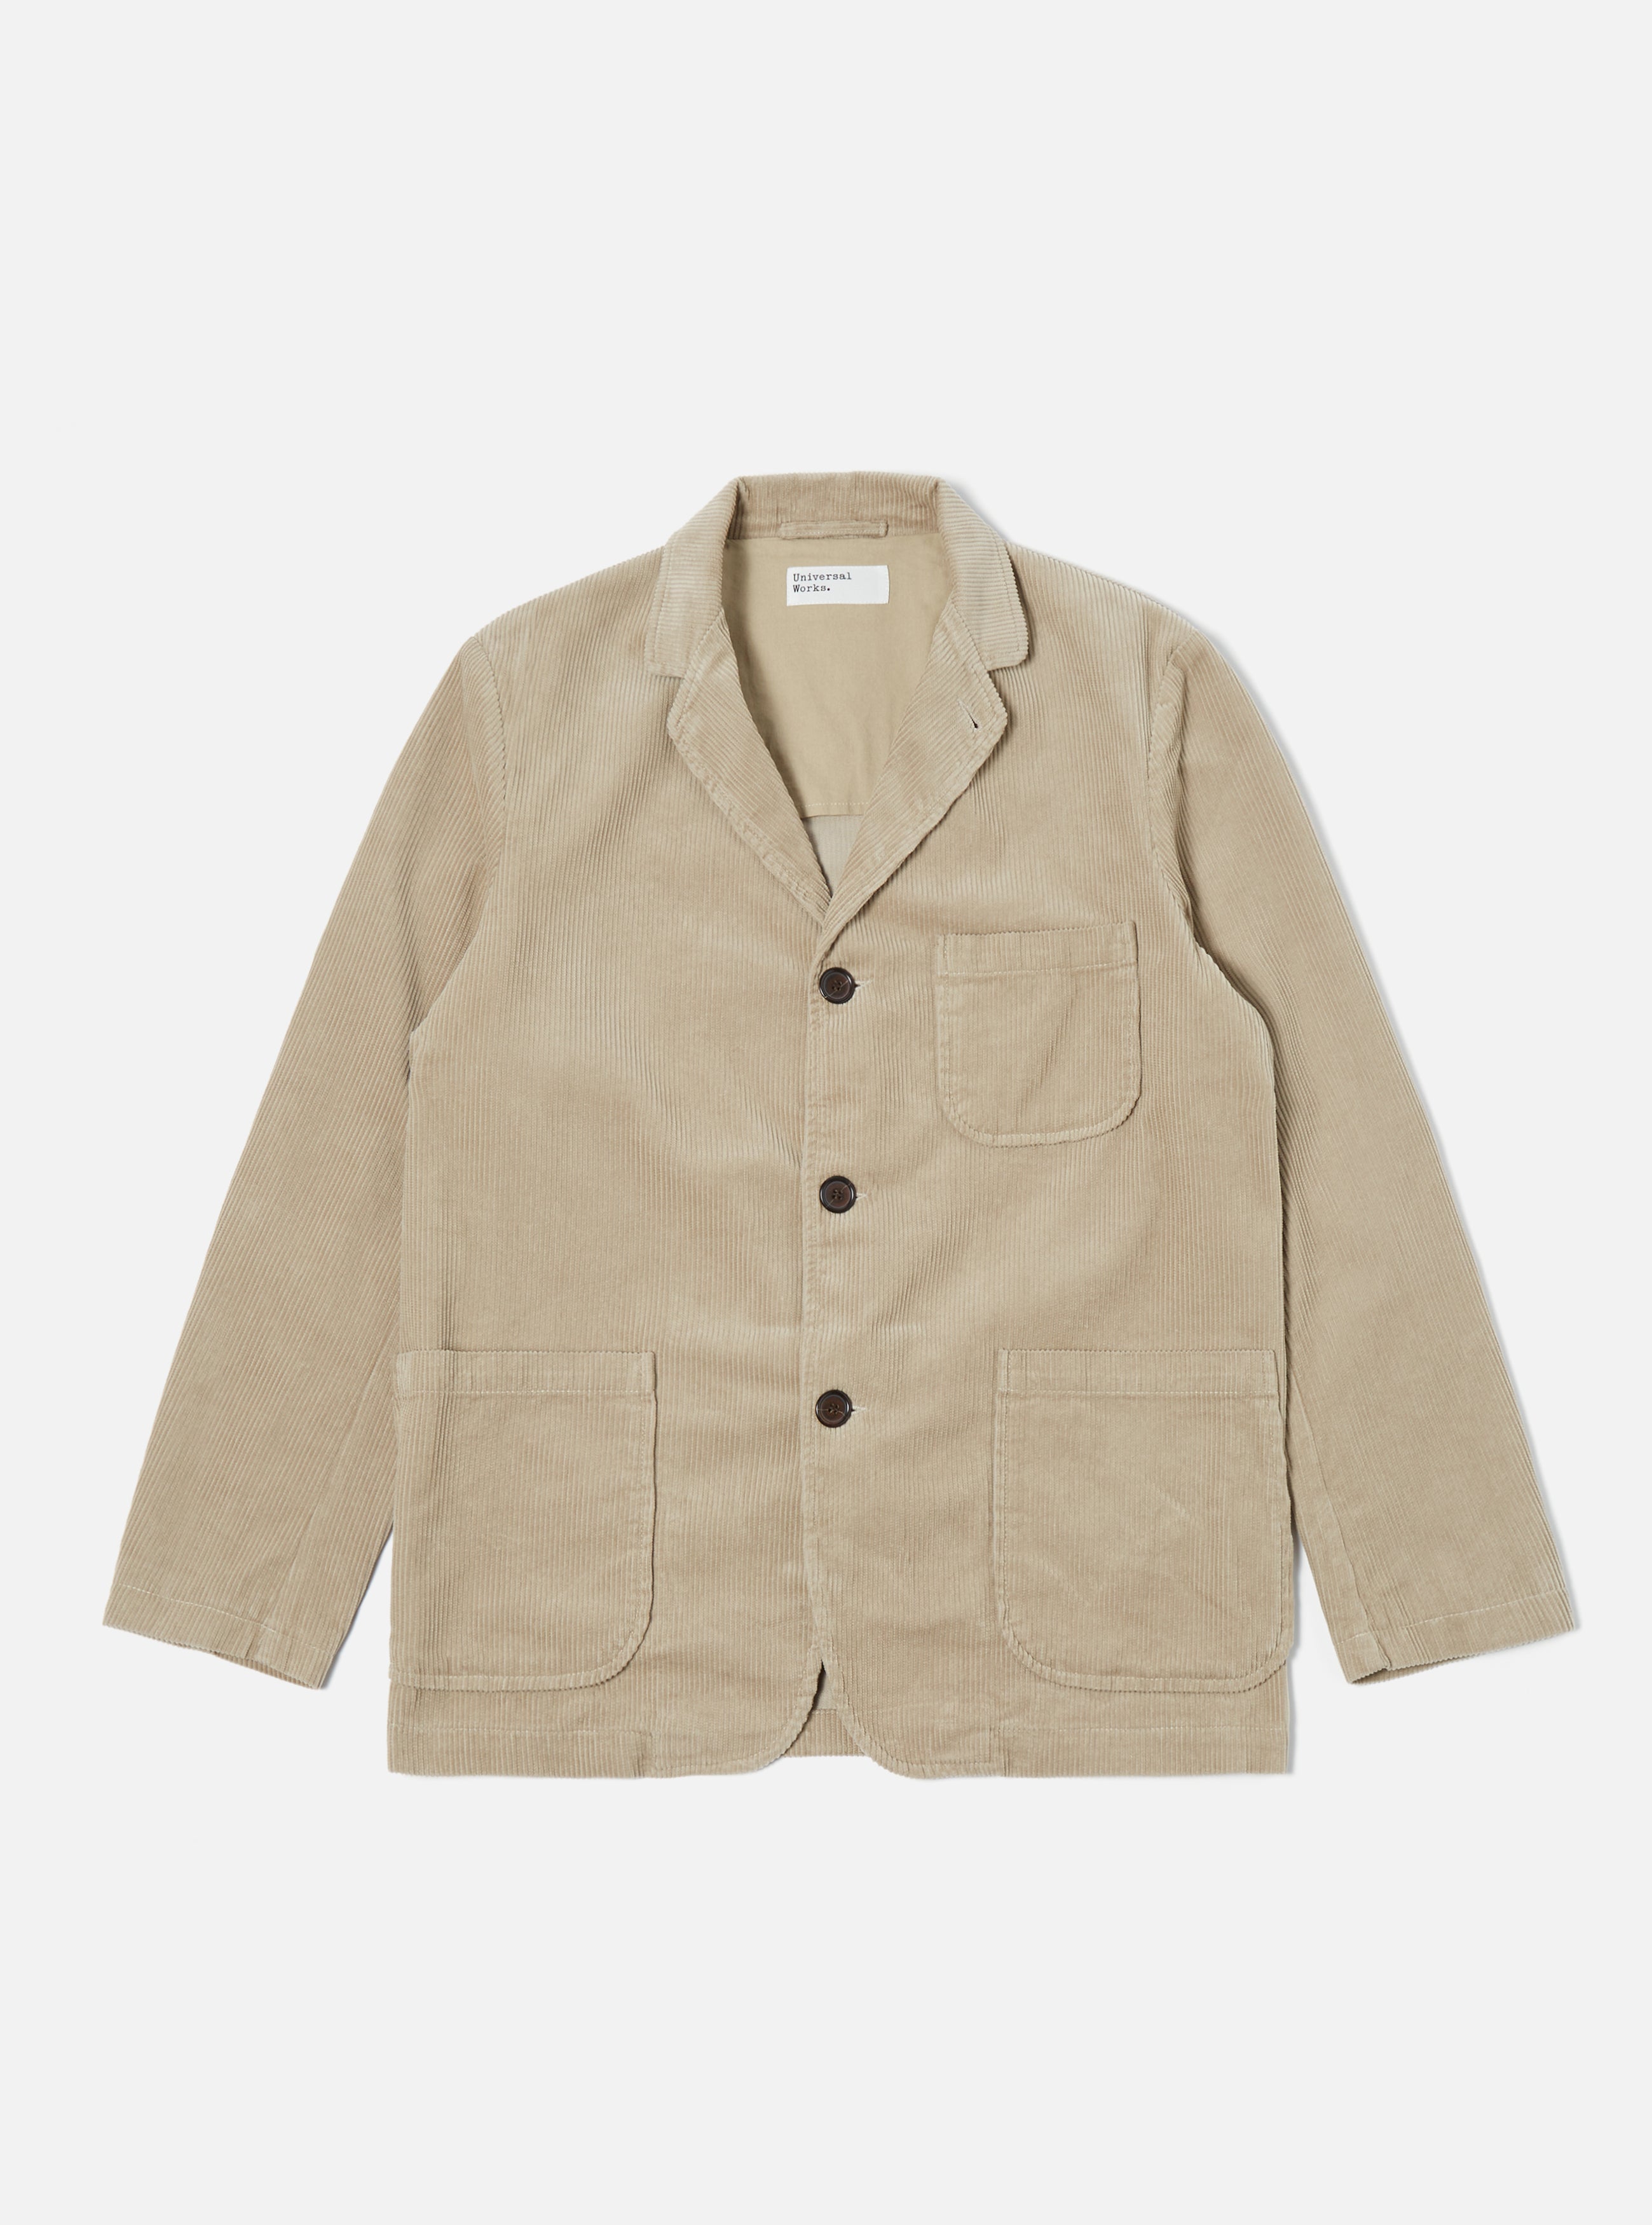 Universal Works Three Button Jacket in Stone Cord